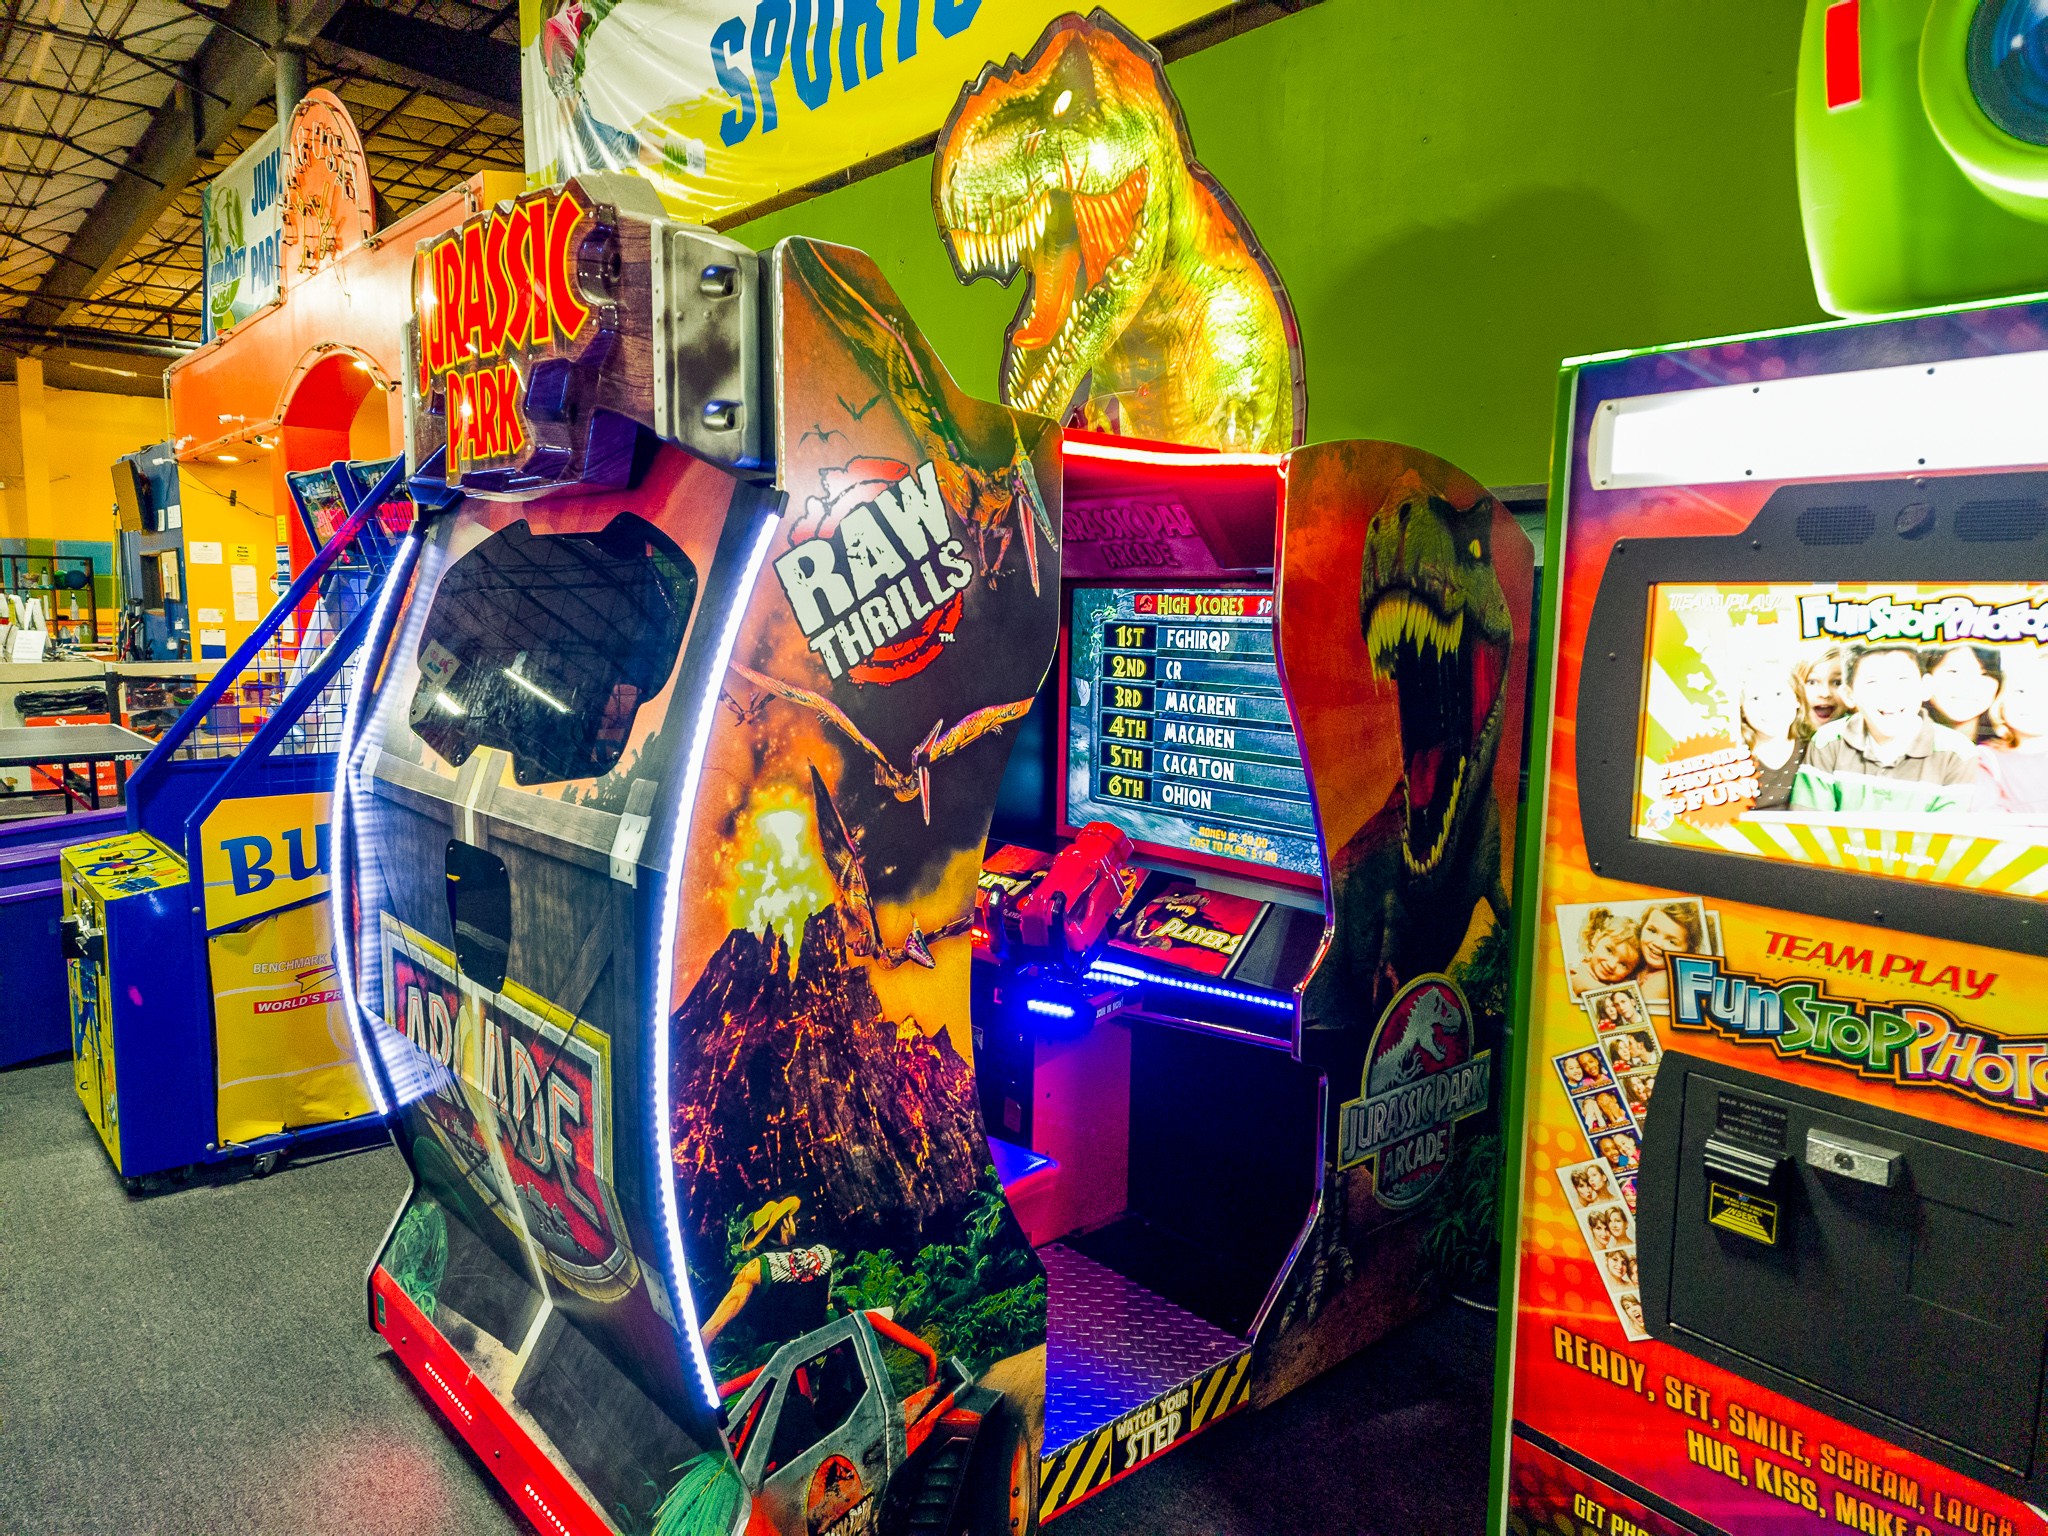 Jump Party USA has an arcade gaming area with games like Jurassic Park Shooter Arcade for kids and adults to have a blast